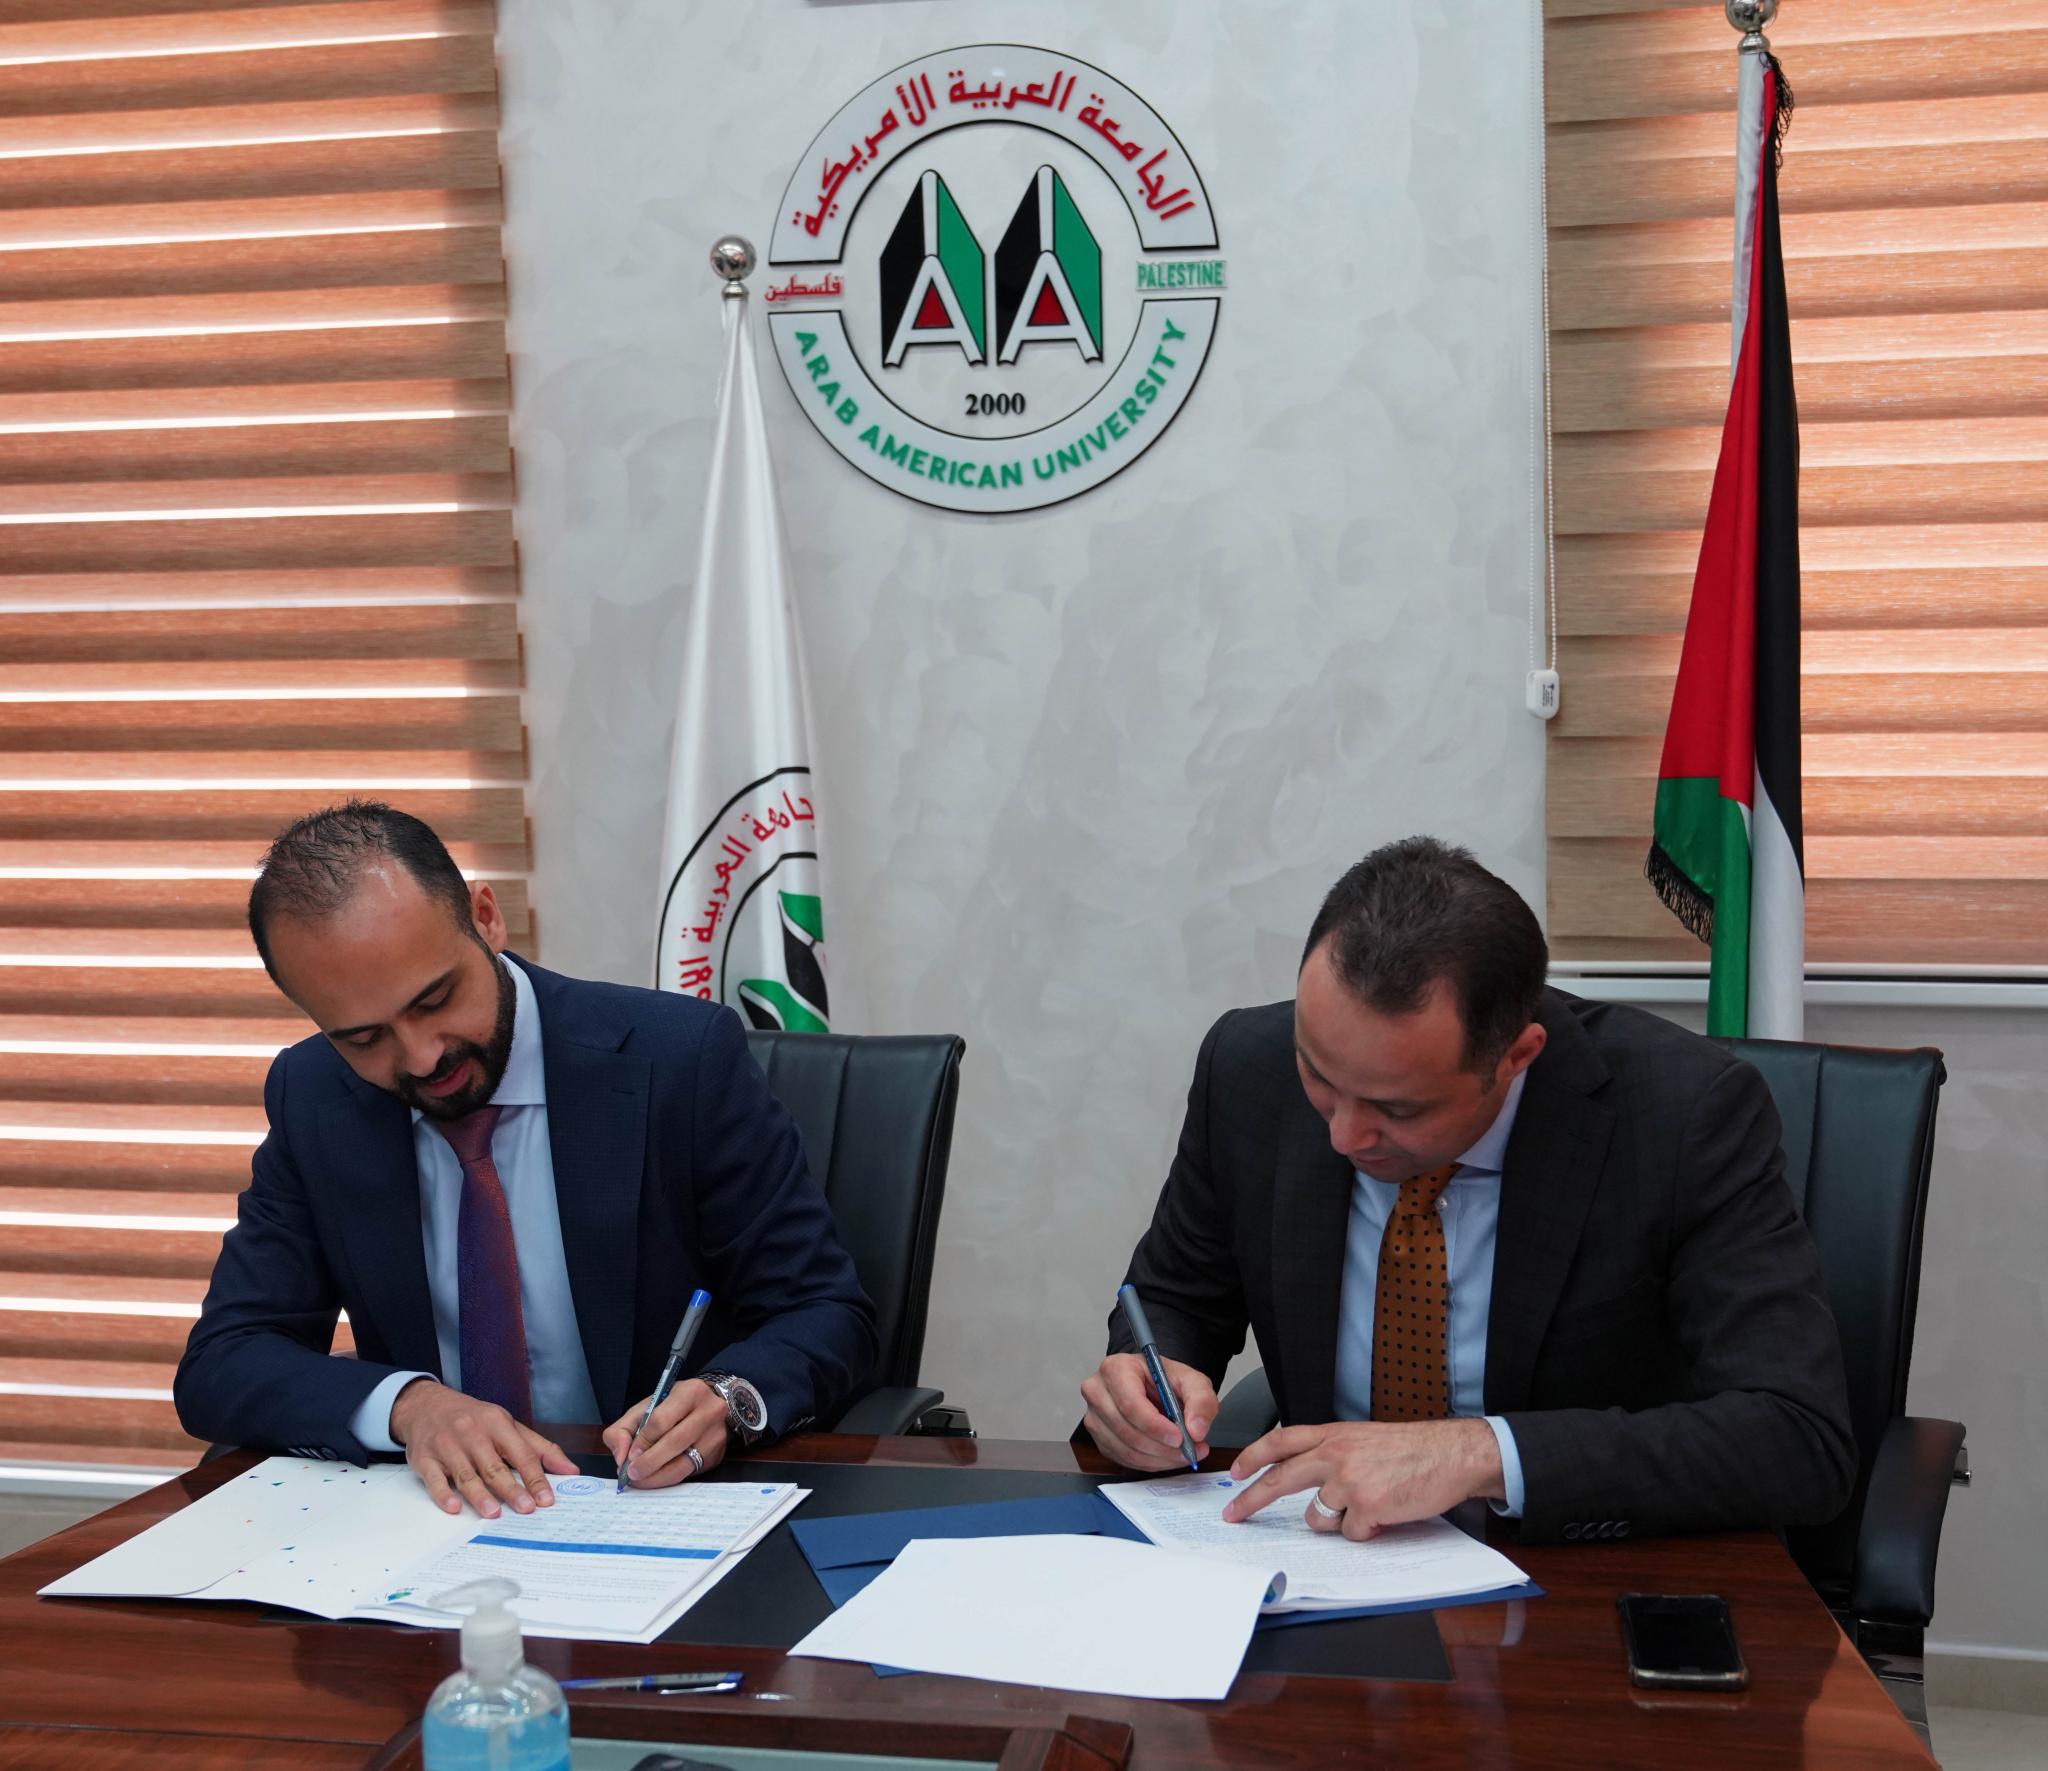 AAUP and Jawwal signed a new strategic partnership agreement